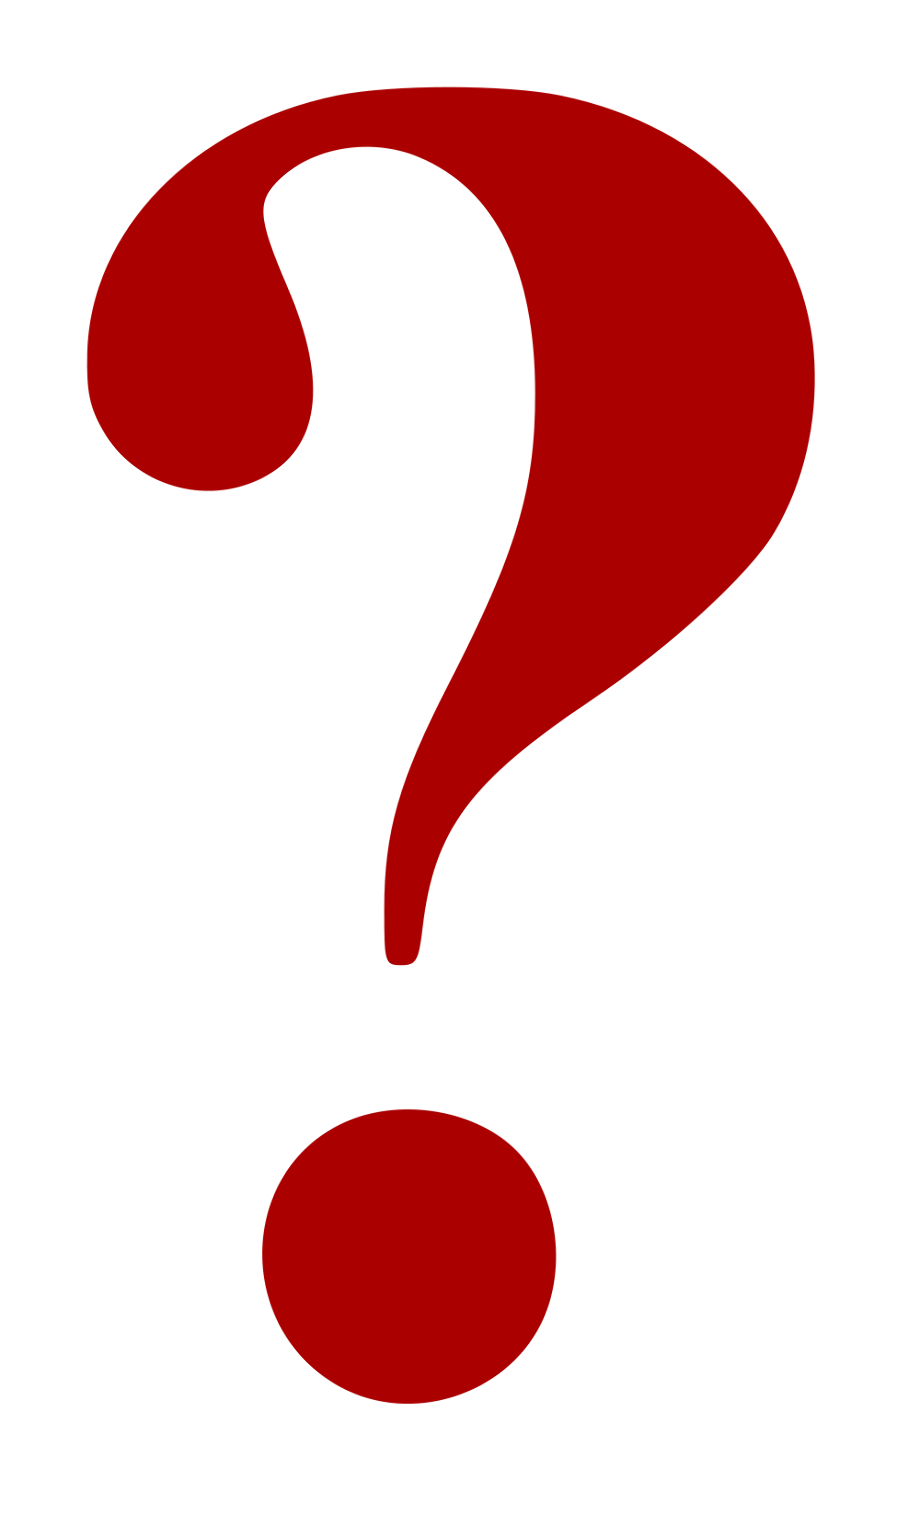 question mark clip art red